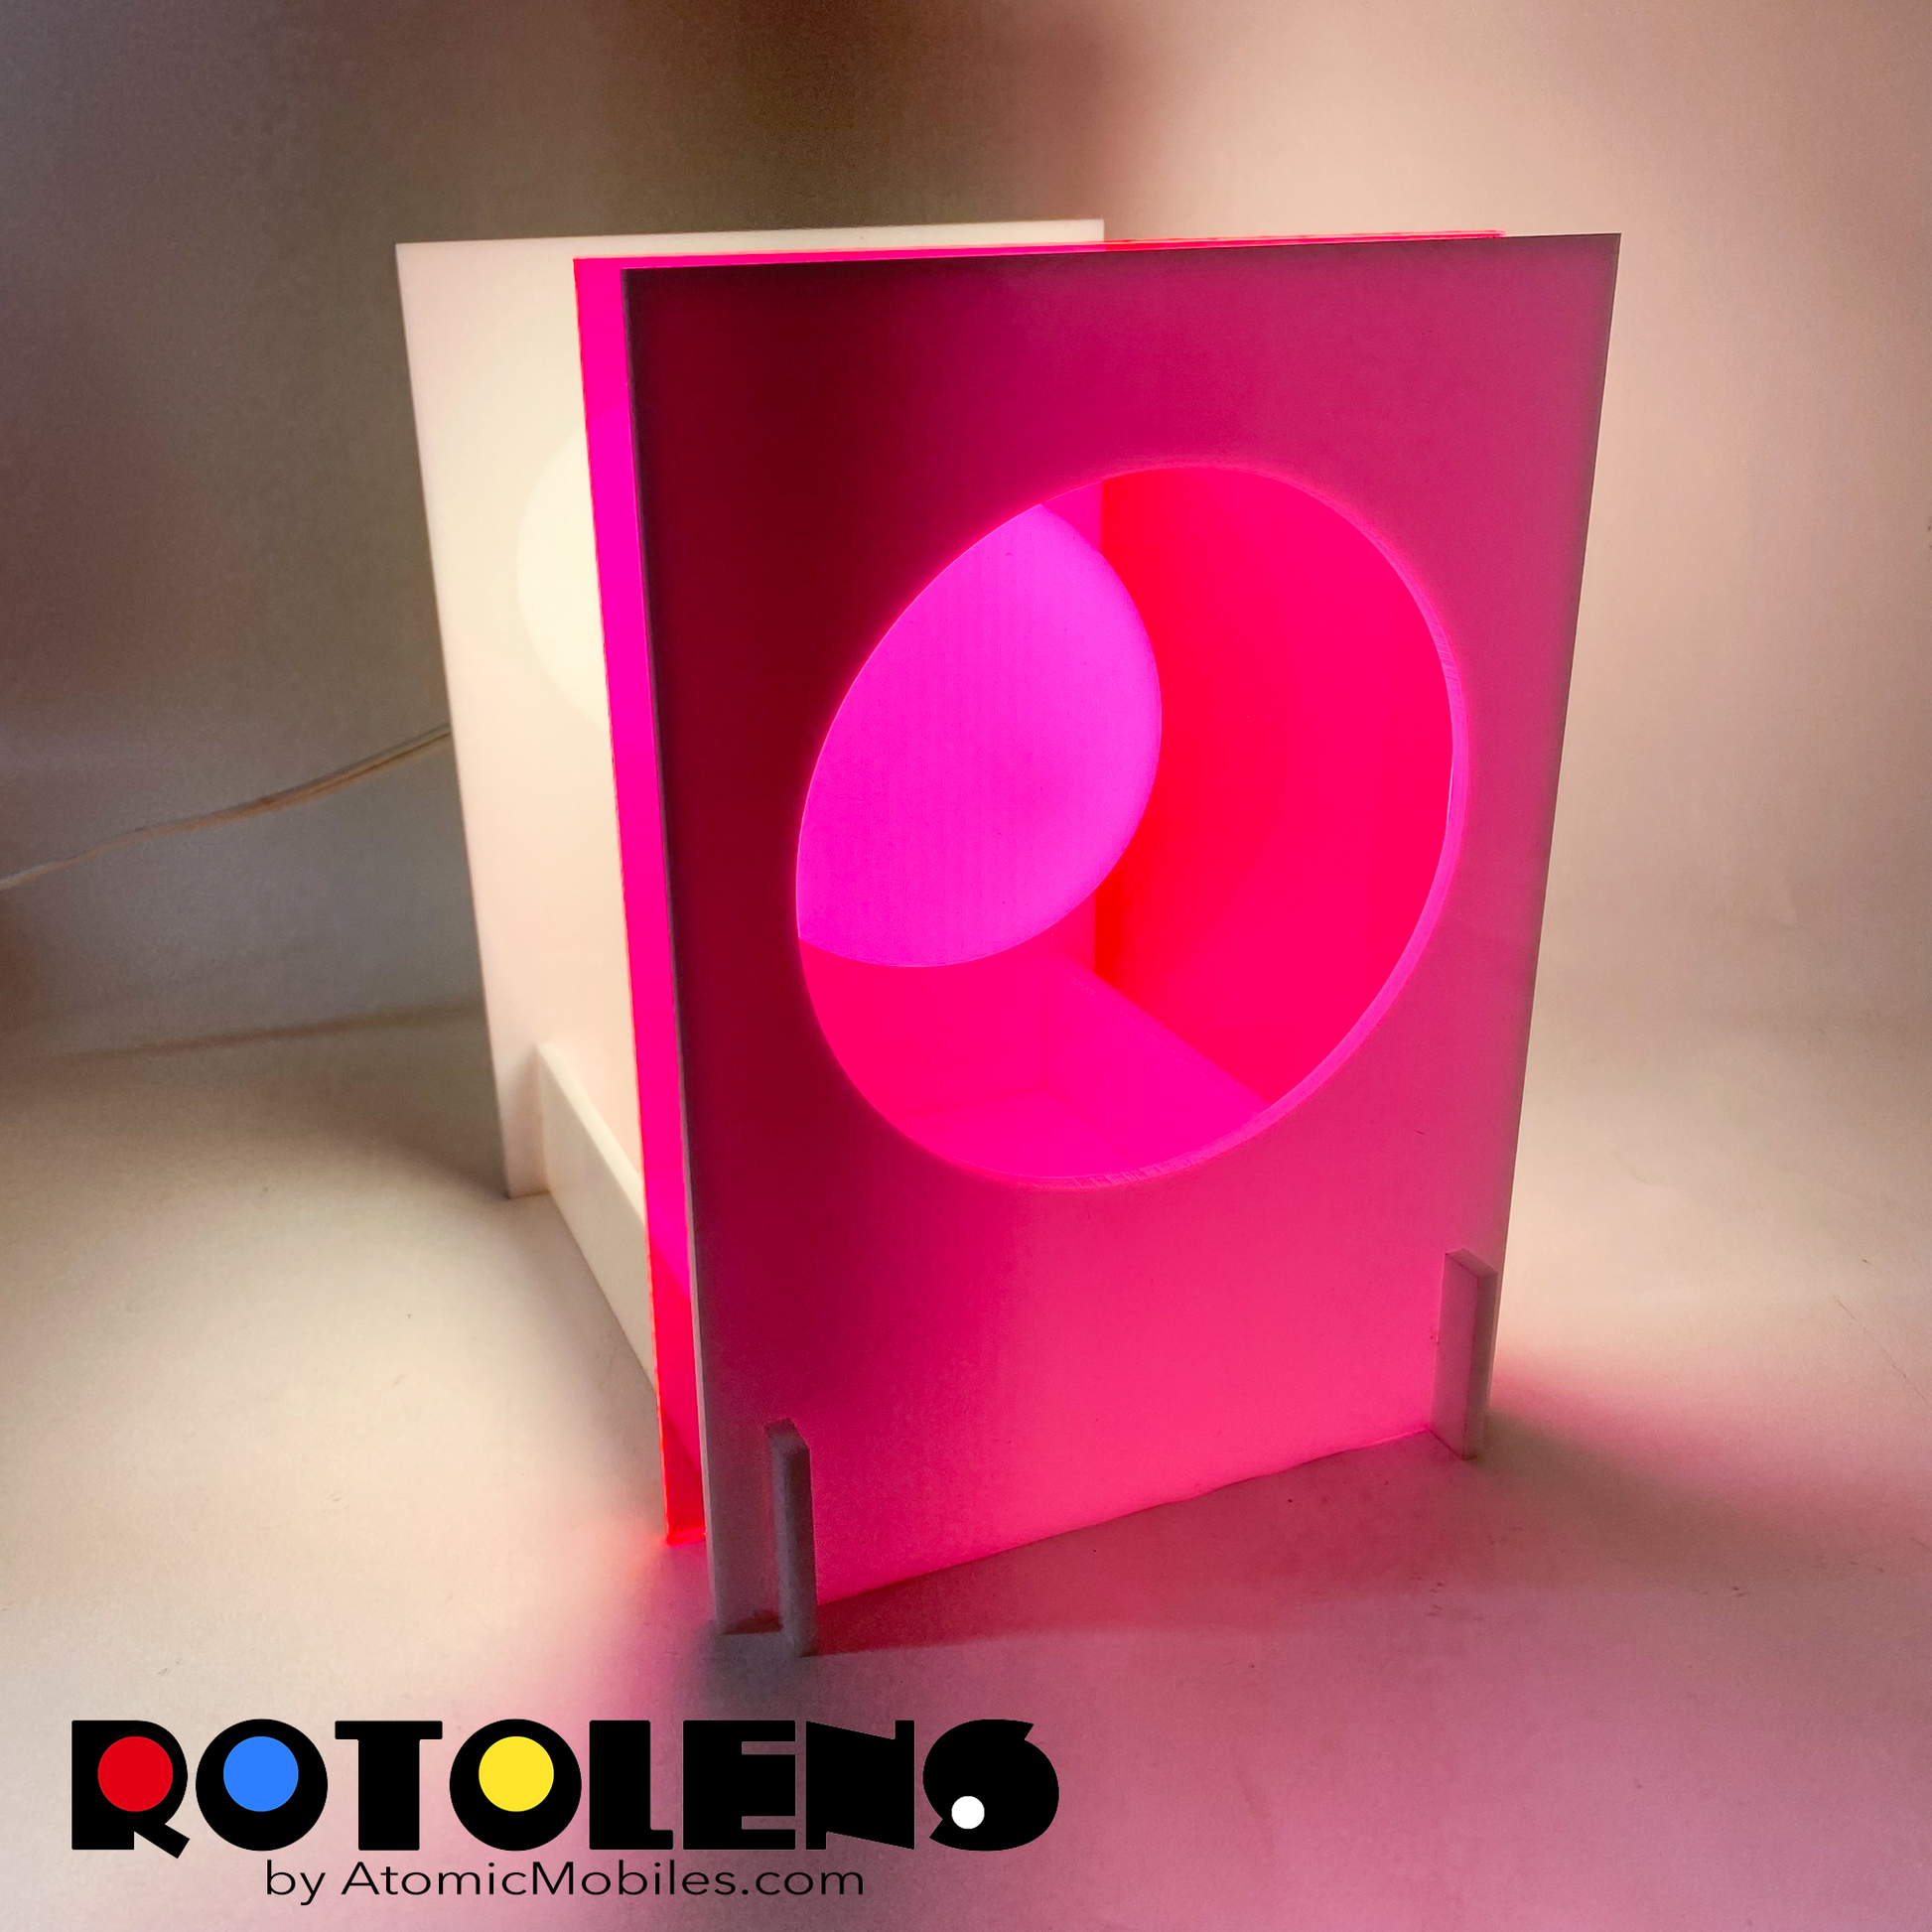 ROTOLENS Space Age Lamp with interchangeable clear plexiglass lens in Fluorescent Hot Pink by AtomicMobiles.com